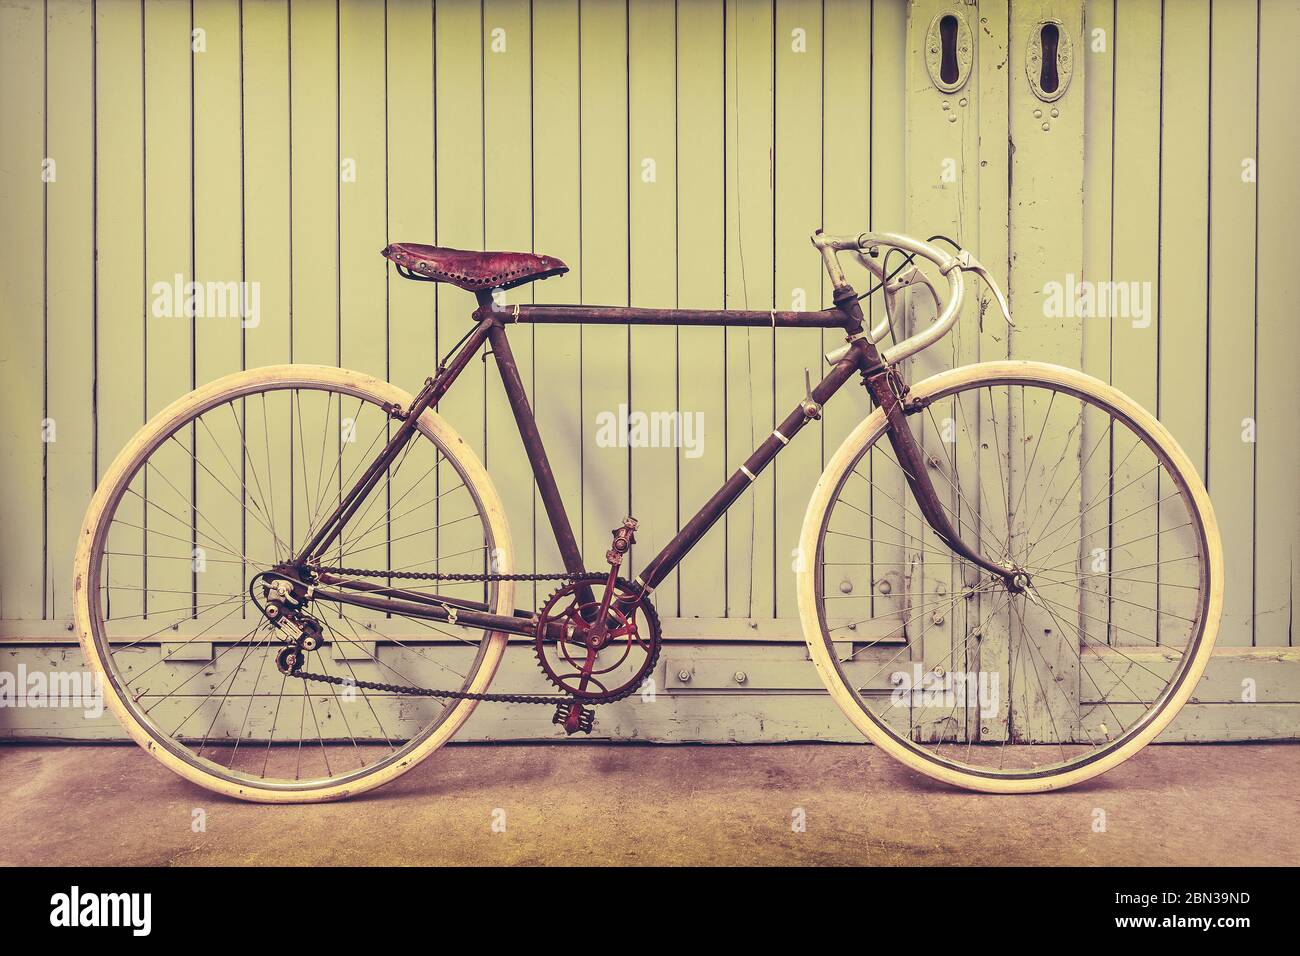 Retro styled image of a rusted racing bicycle parked in an old factory with wooden doors Stock Photo